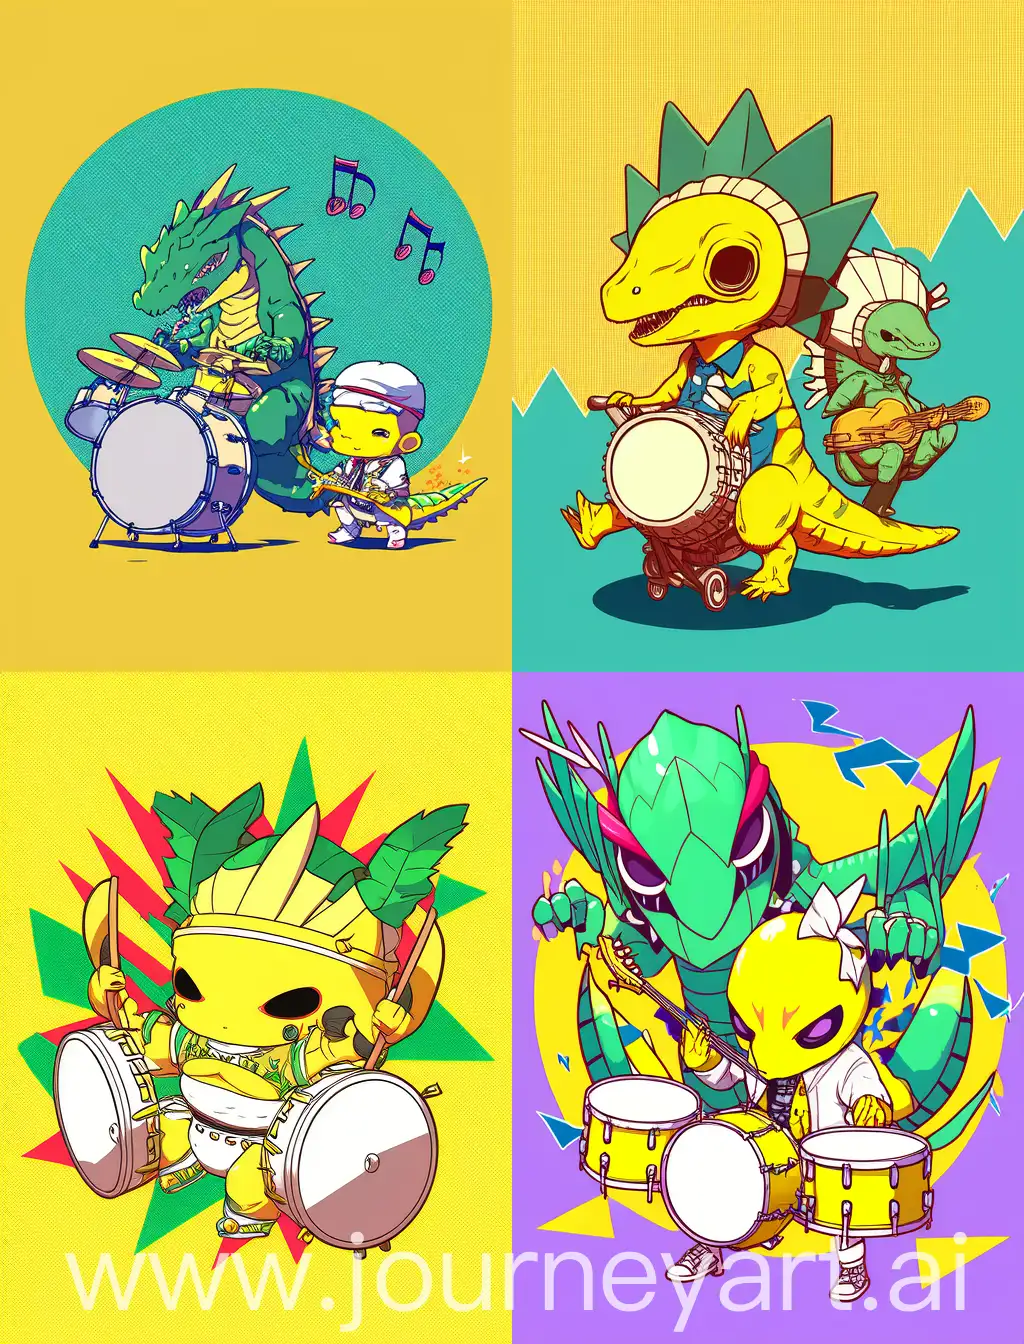 chibi dinosaur and anime guy playing drums, with yellow solid background, 